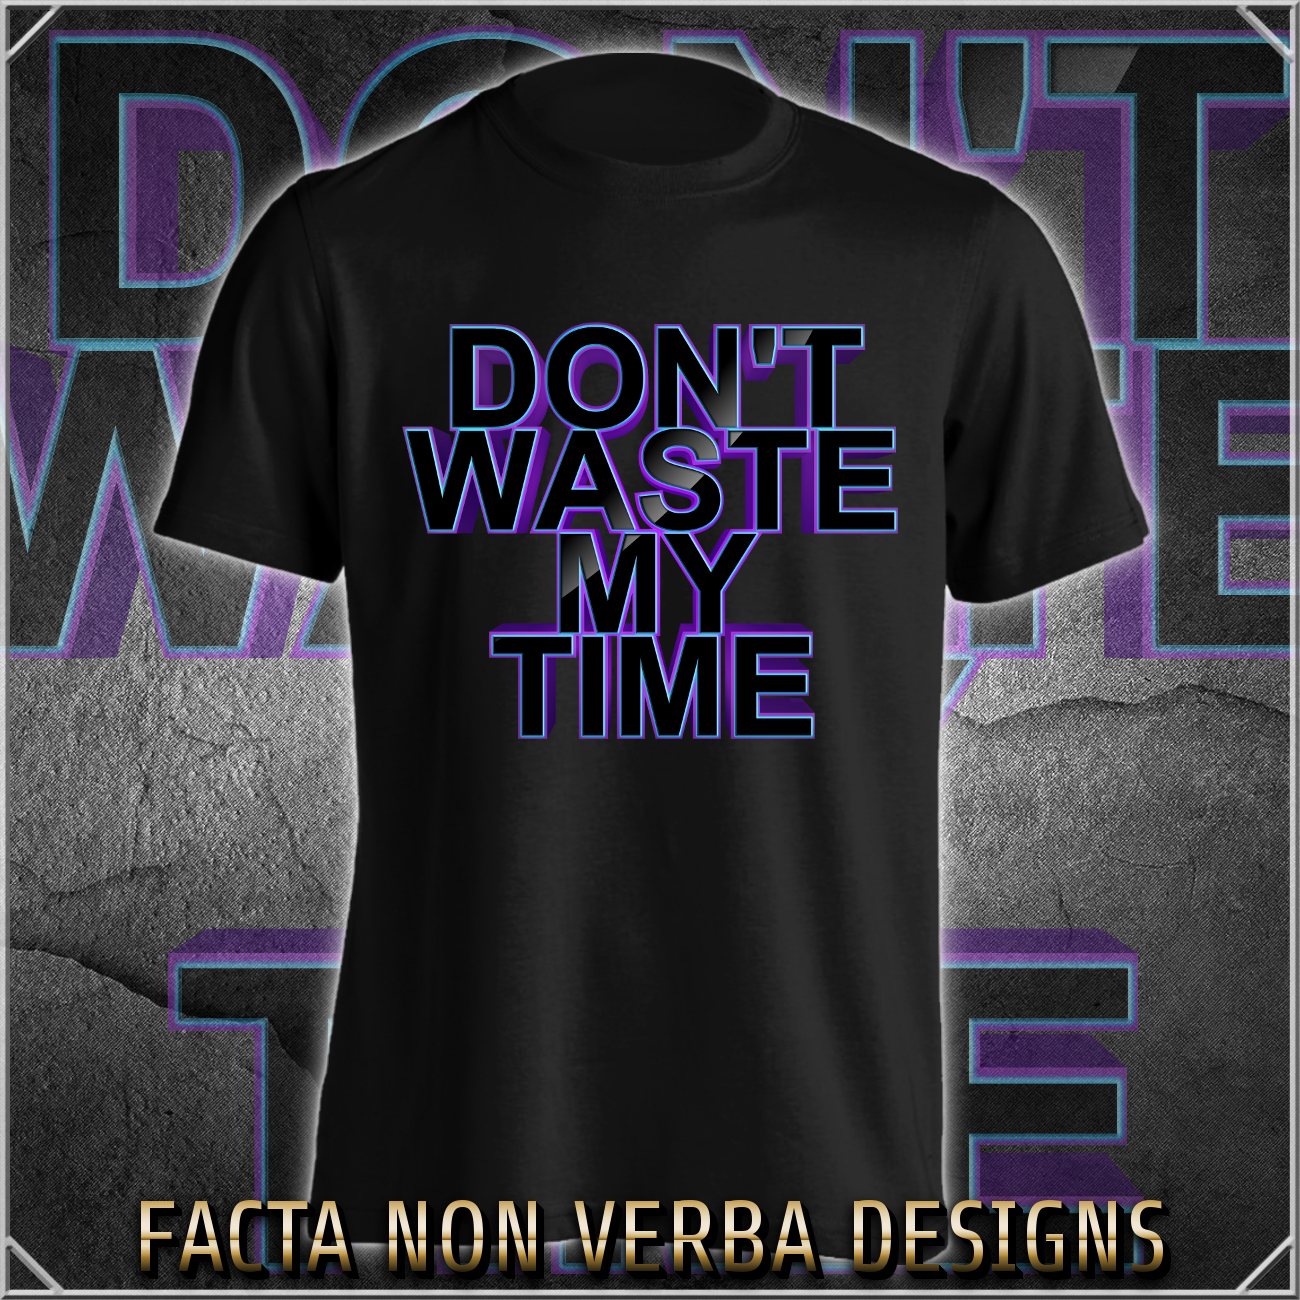 Dont waste my time 03.jpg